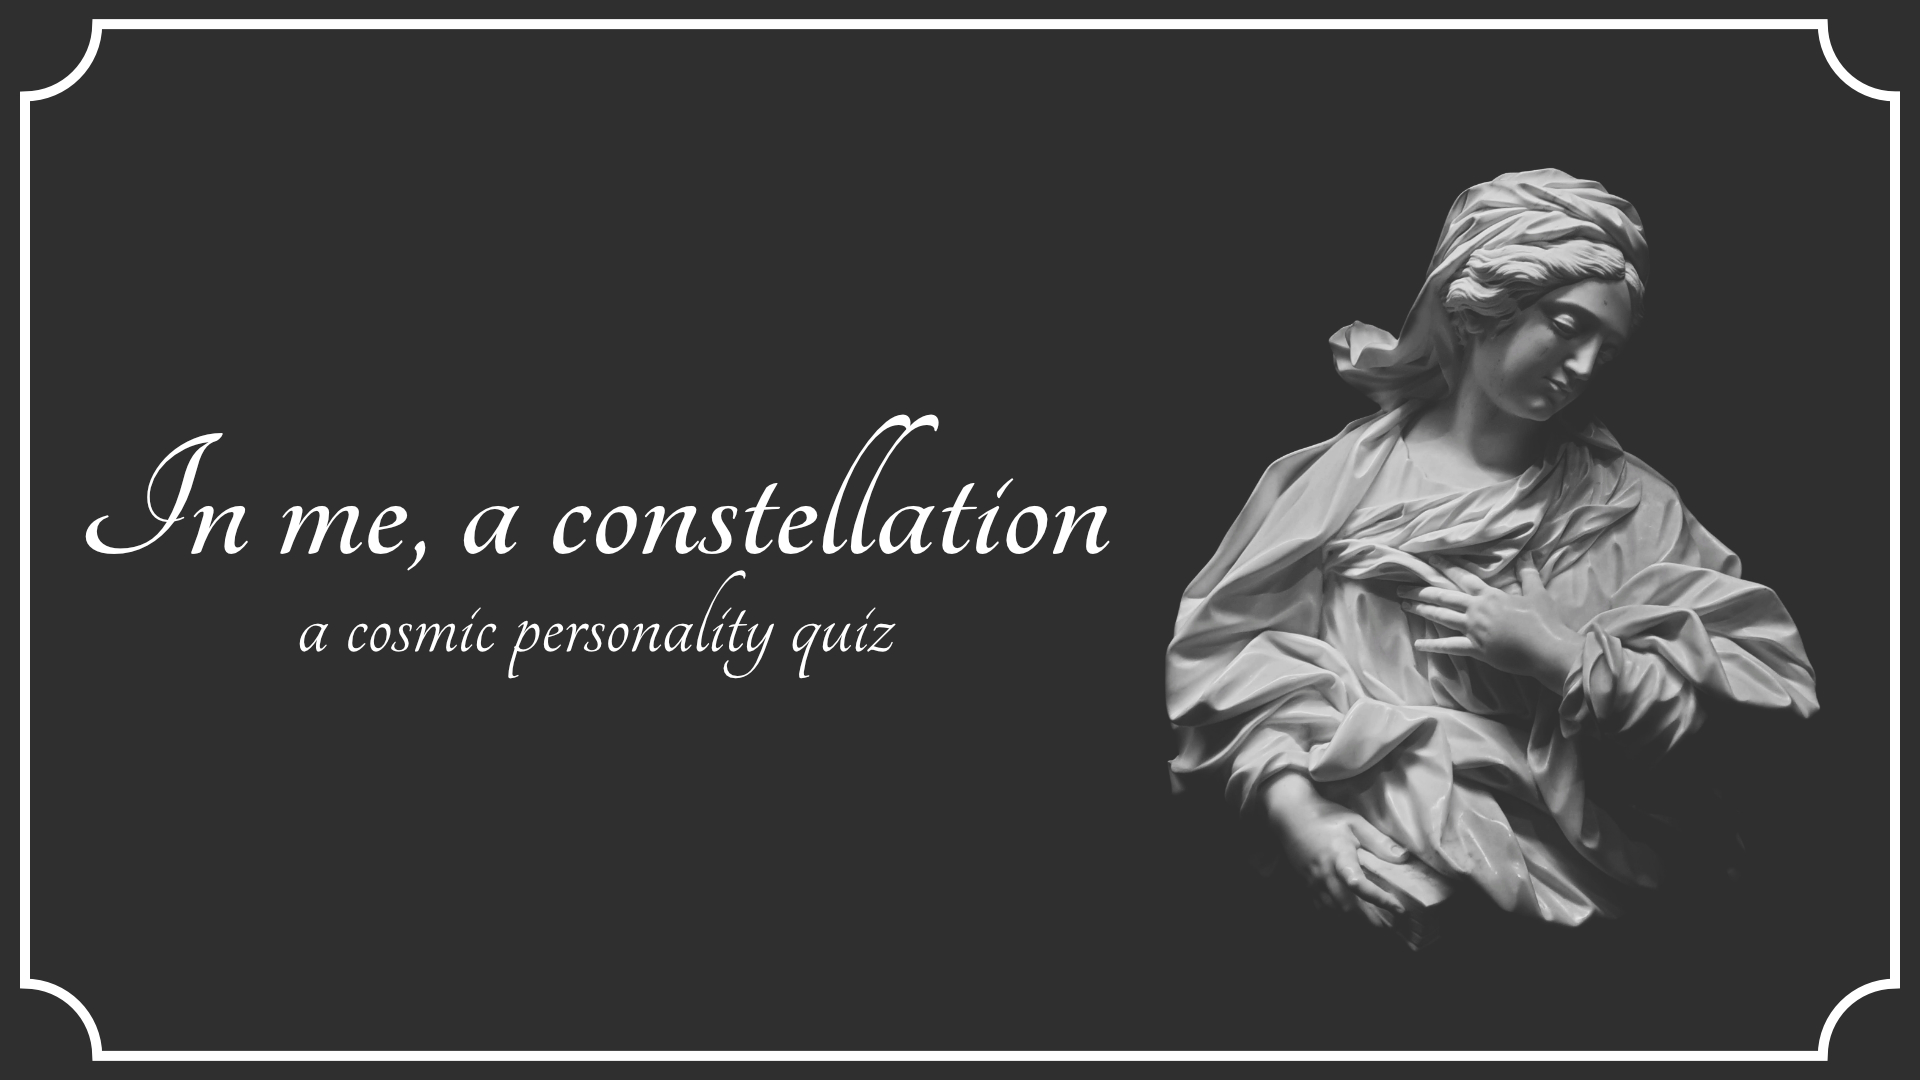 In me, a constellation - a cosmic personality quiz